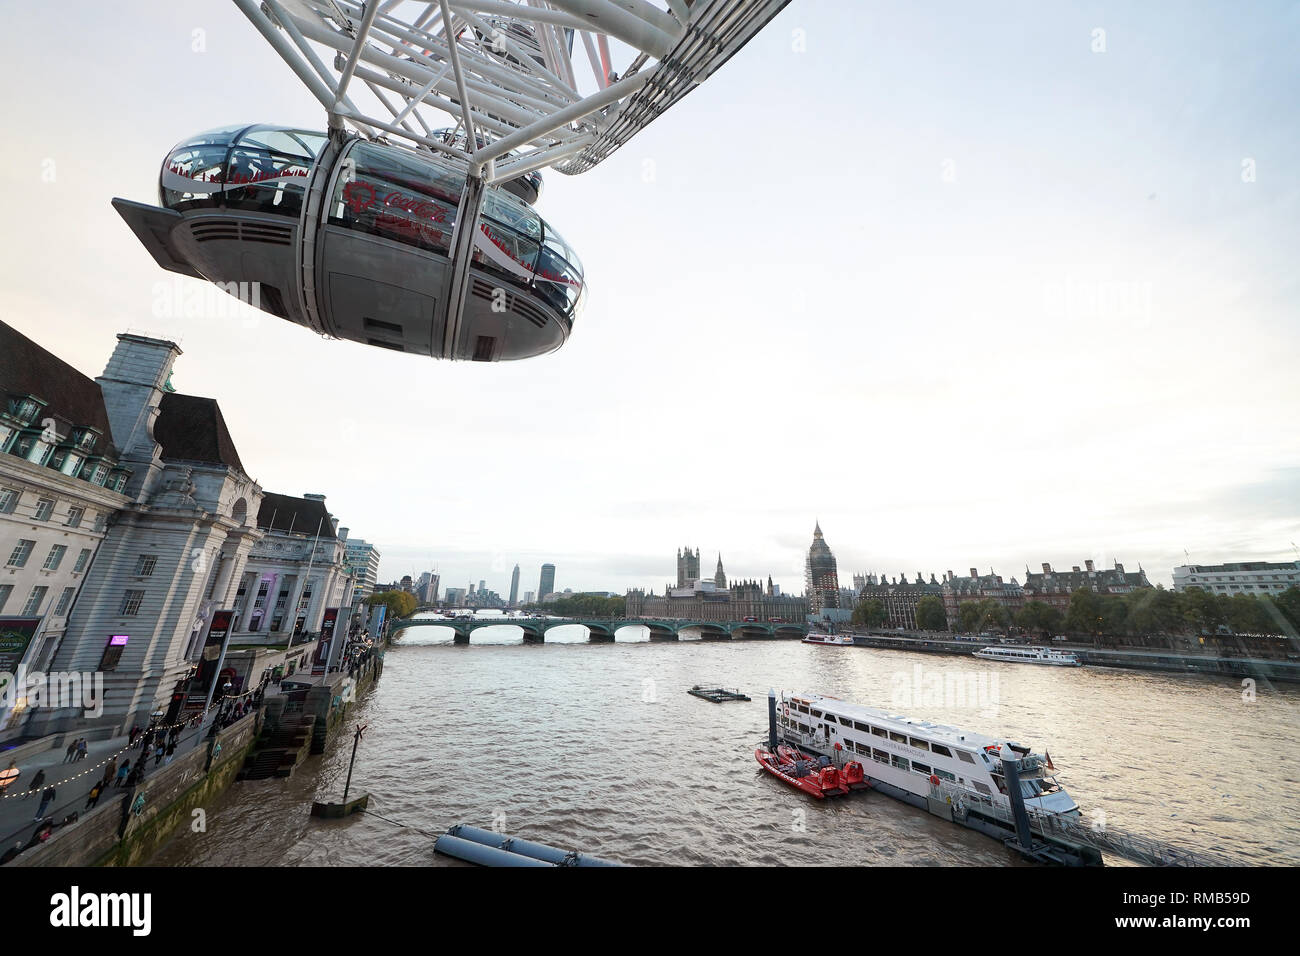 A view of the Coco Cola London Eye wheel passenger compartment in London, United Kingdom.  It is Europe's tallest cantilevered observation wheel. Stock Photo